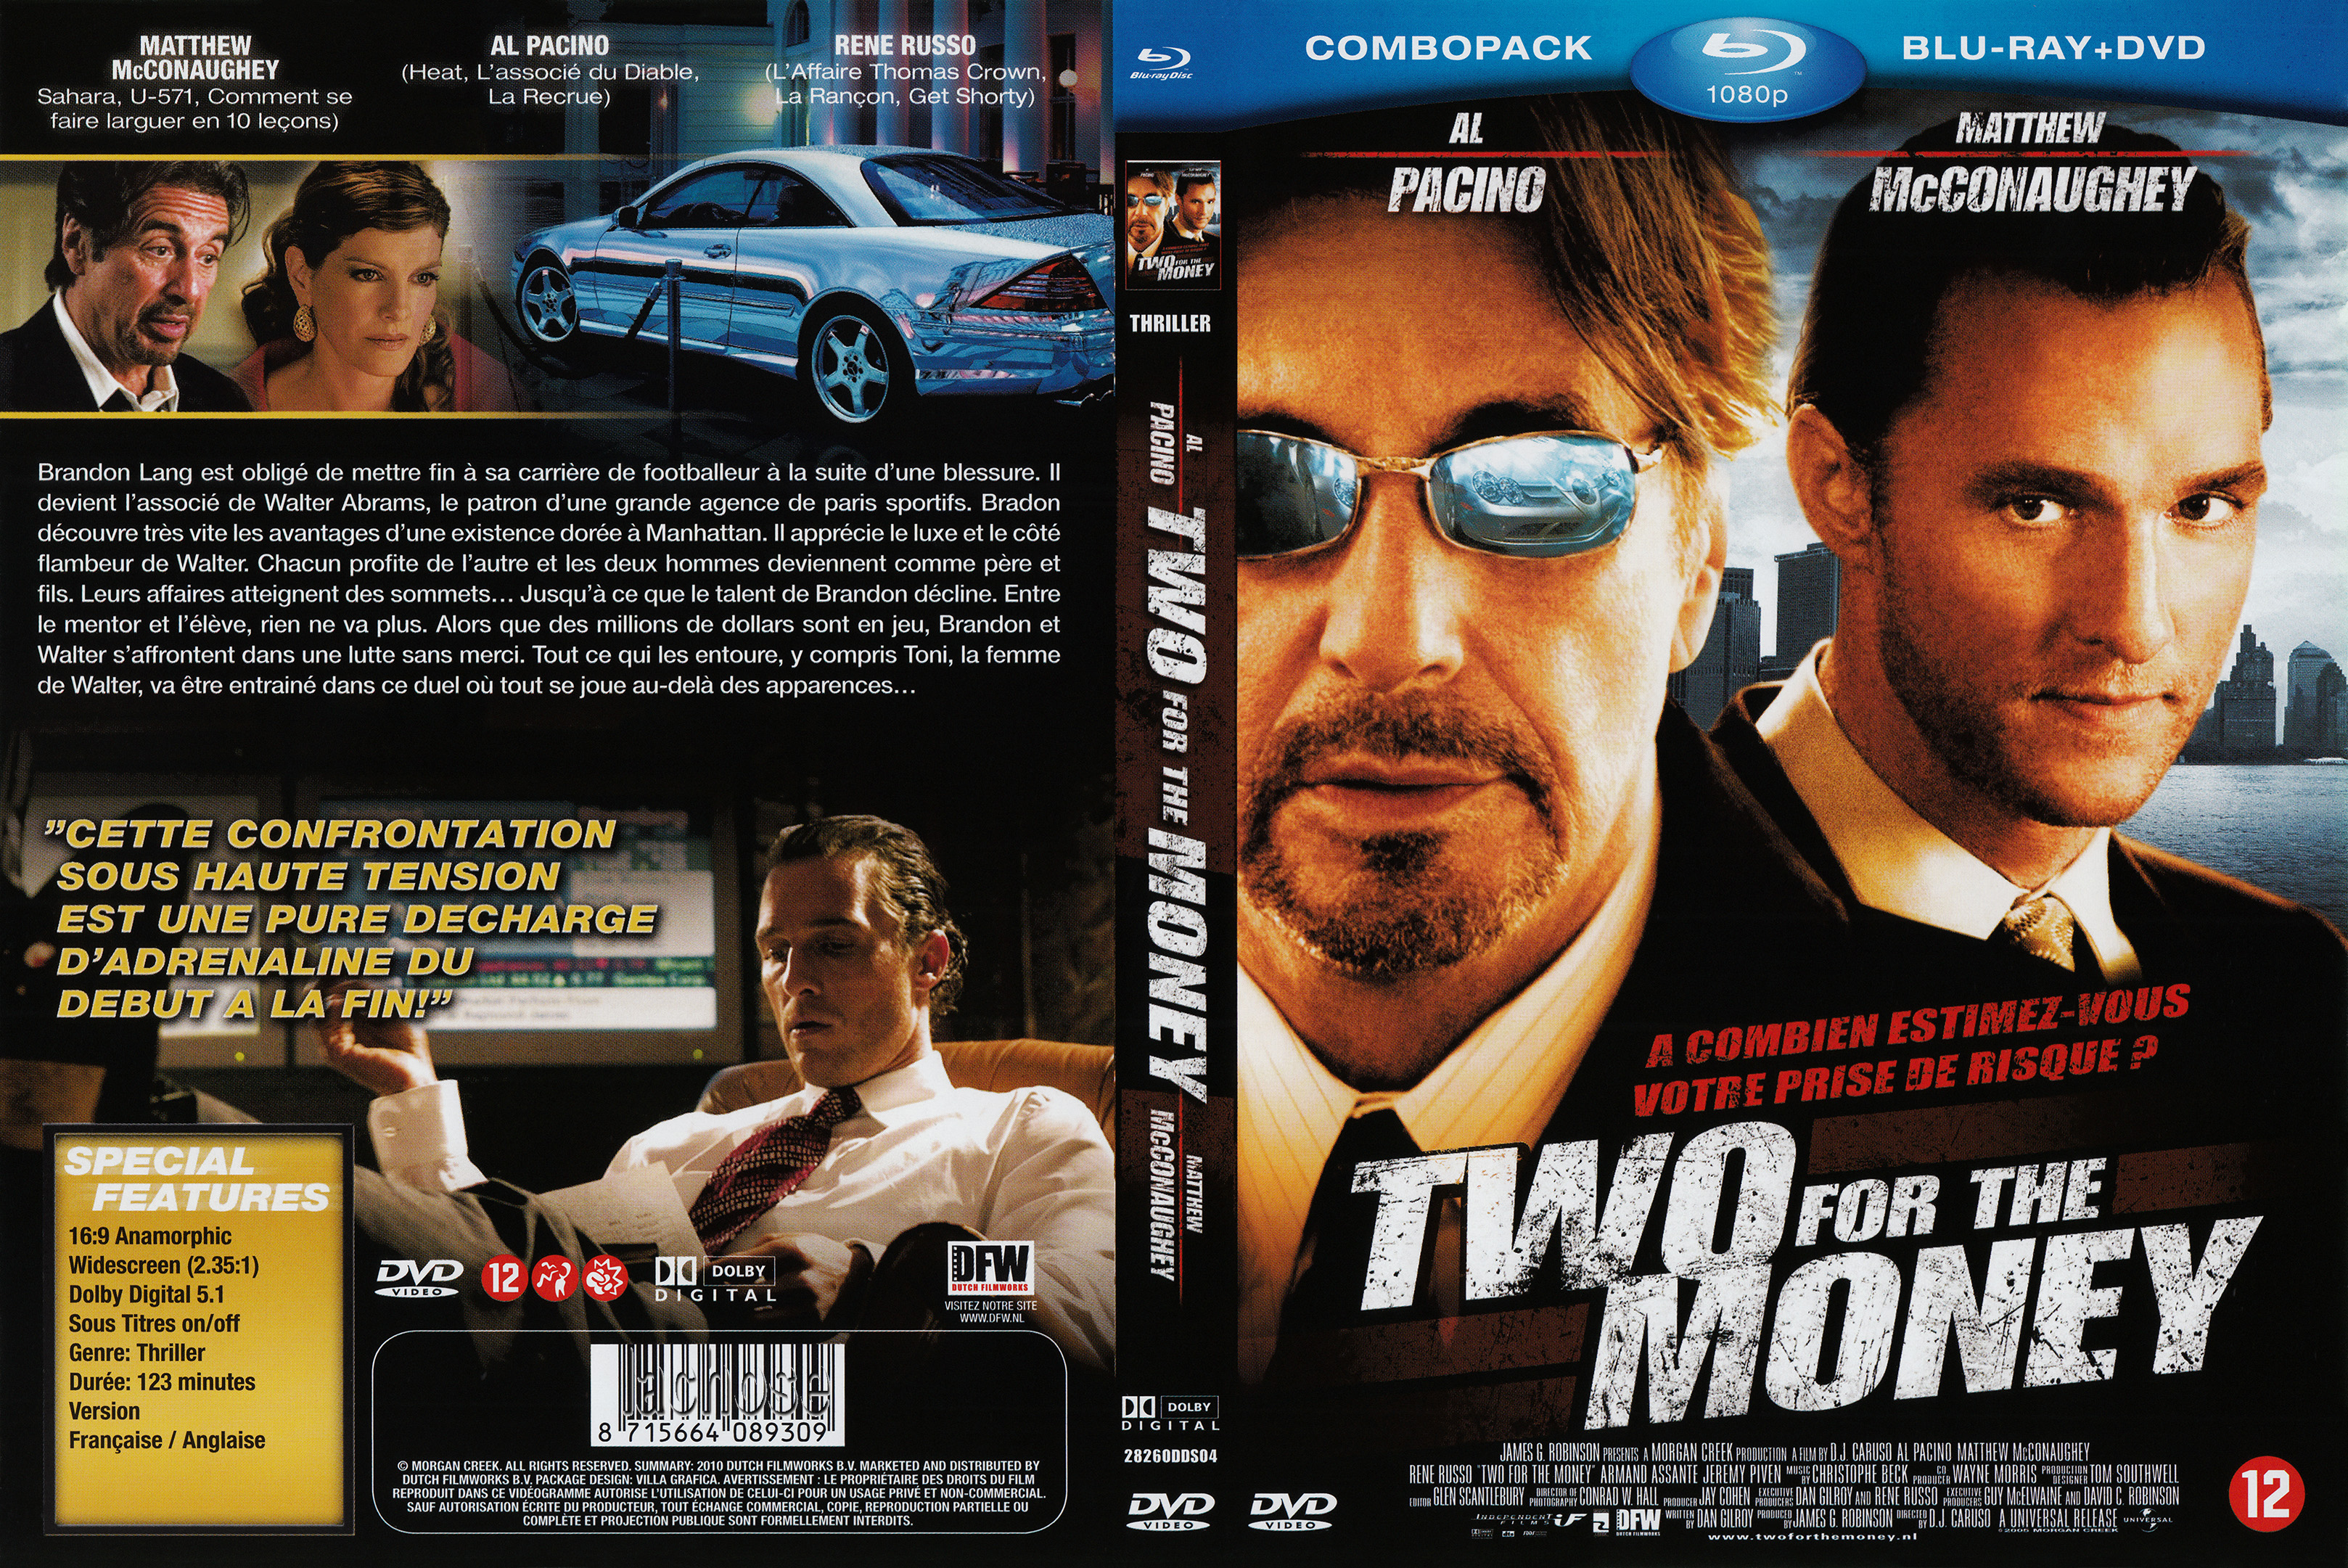 Jaquette DVD Two for the money (BLU-RAY) v2